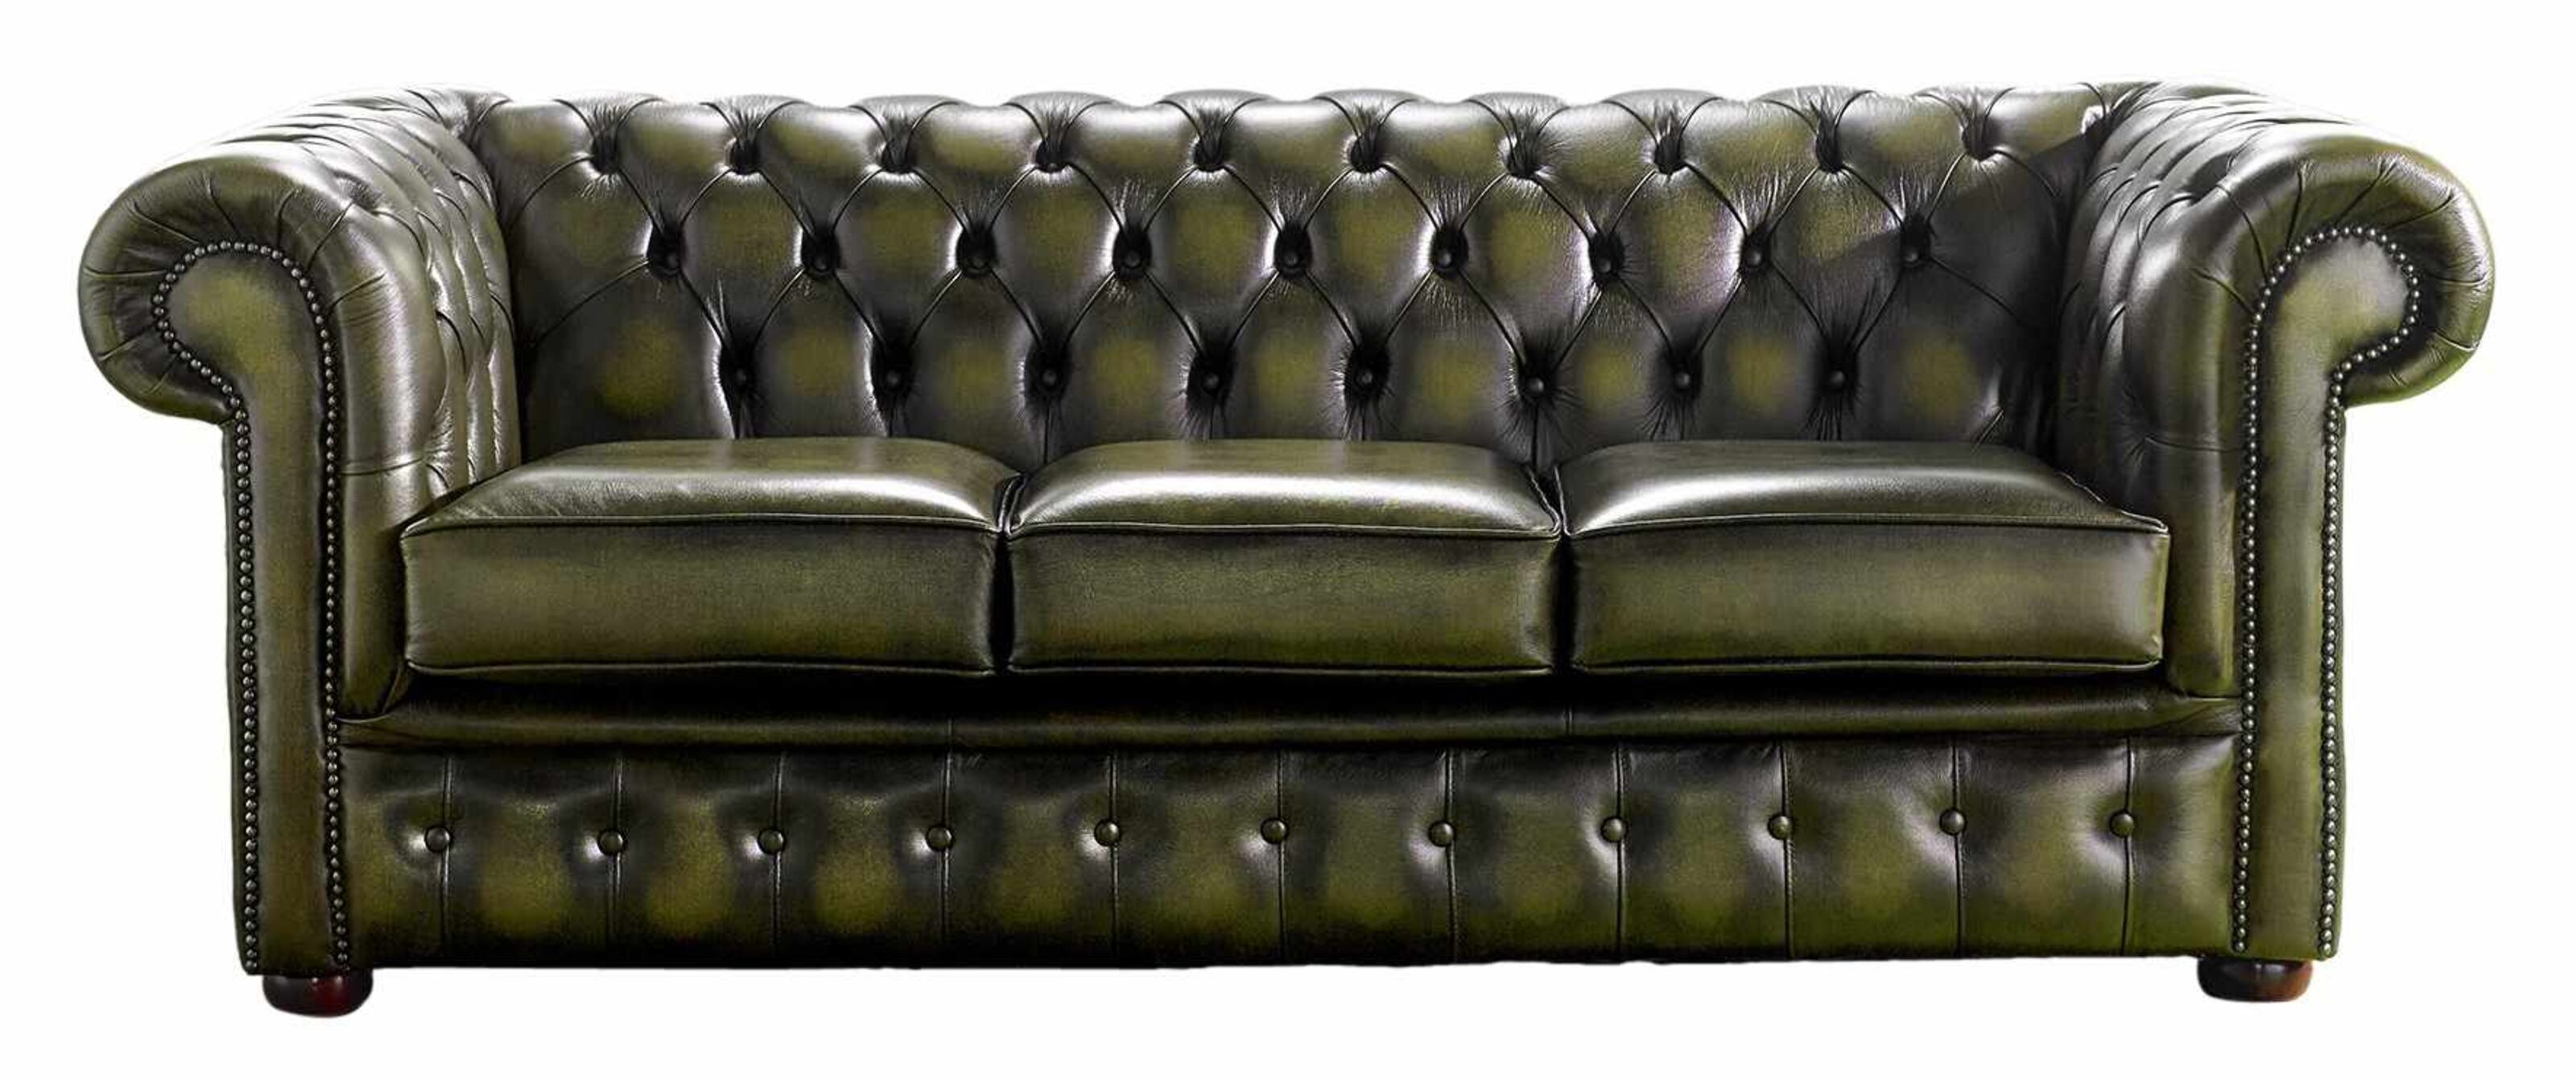 Diverse Designs Exploring the Range of Chesterfield Sofa Styles  %Post Title